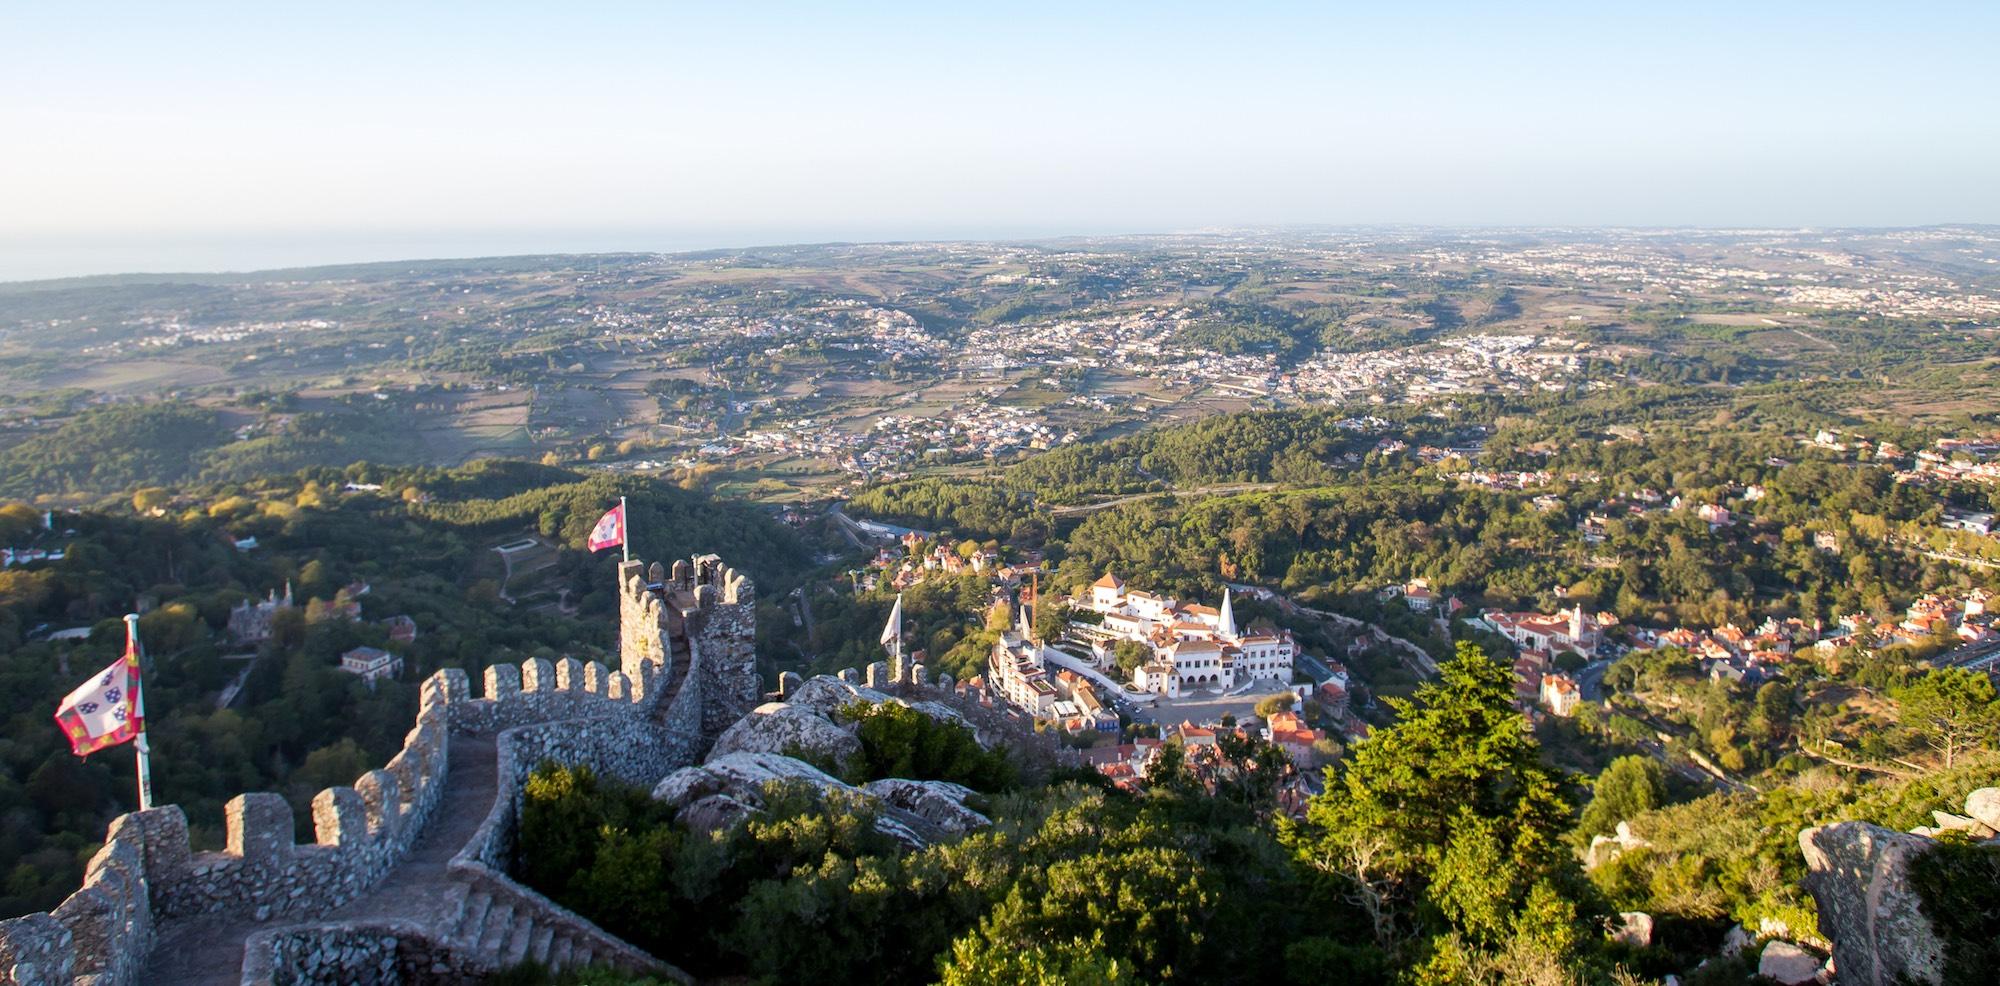 Overlooking the town of Sintra, the Moorish Castle served as a watchtower, guaranteeing the protection of Lisbon and its surroundings. – © PSML / Luís Duarte